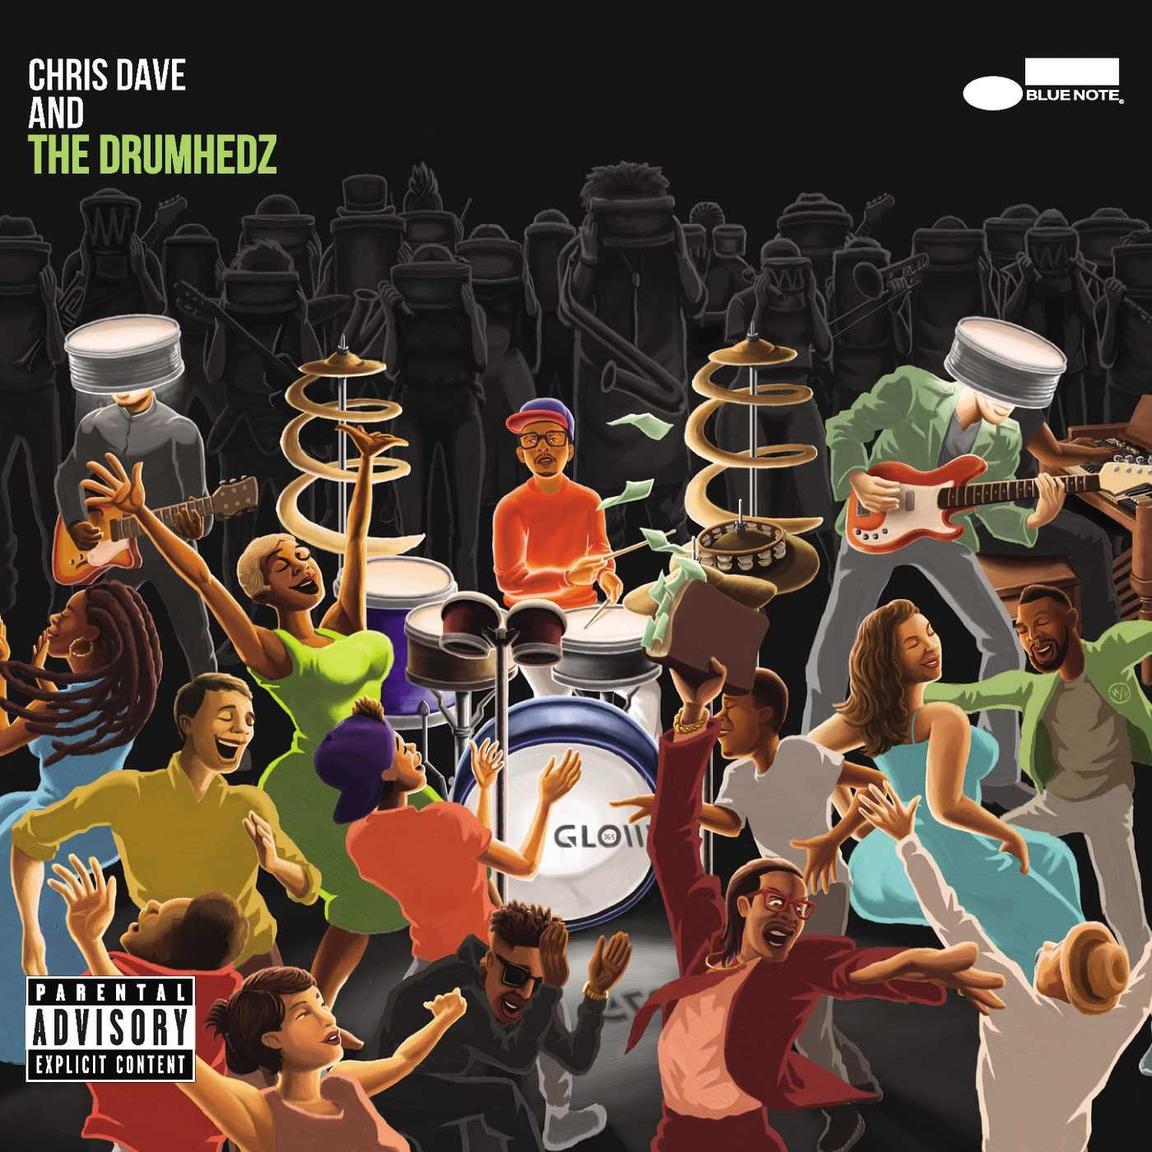 Chris Dave & The Drumheds